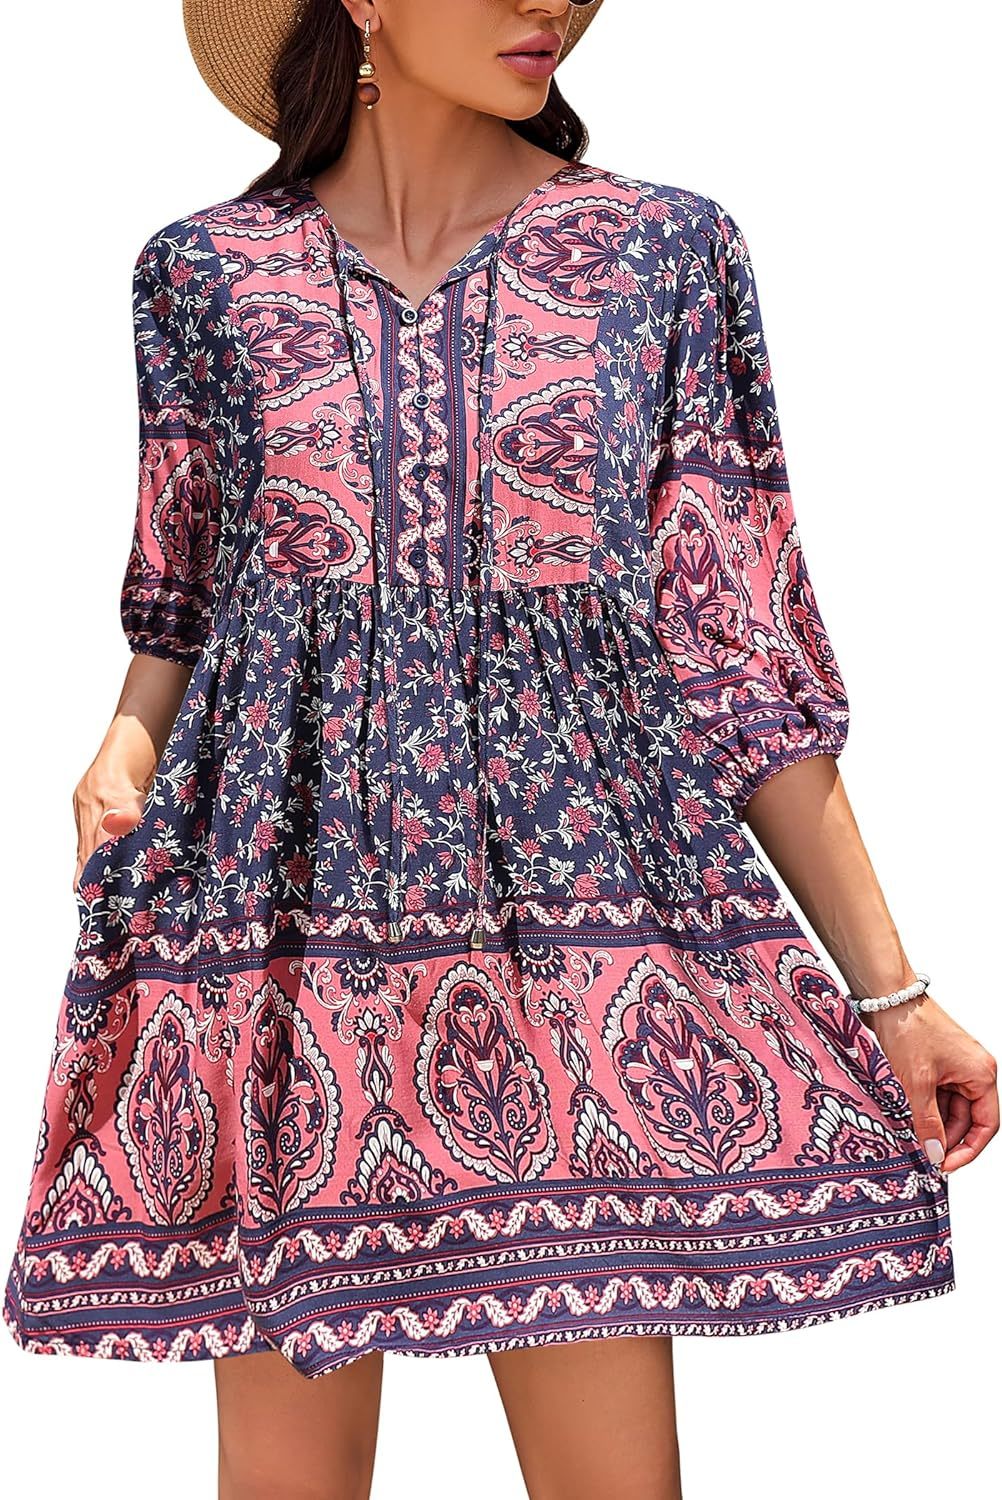 Primary image for Boho Dress with Pockets